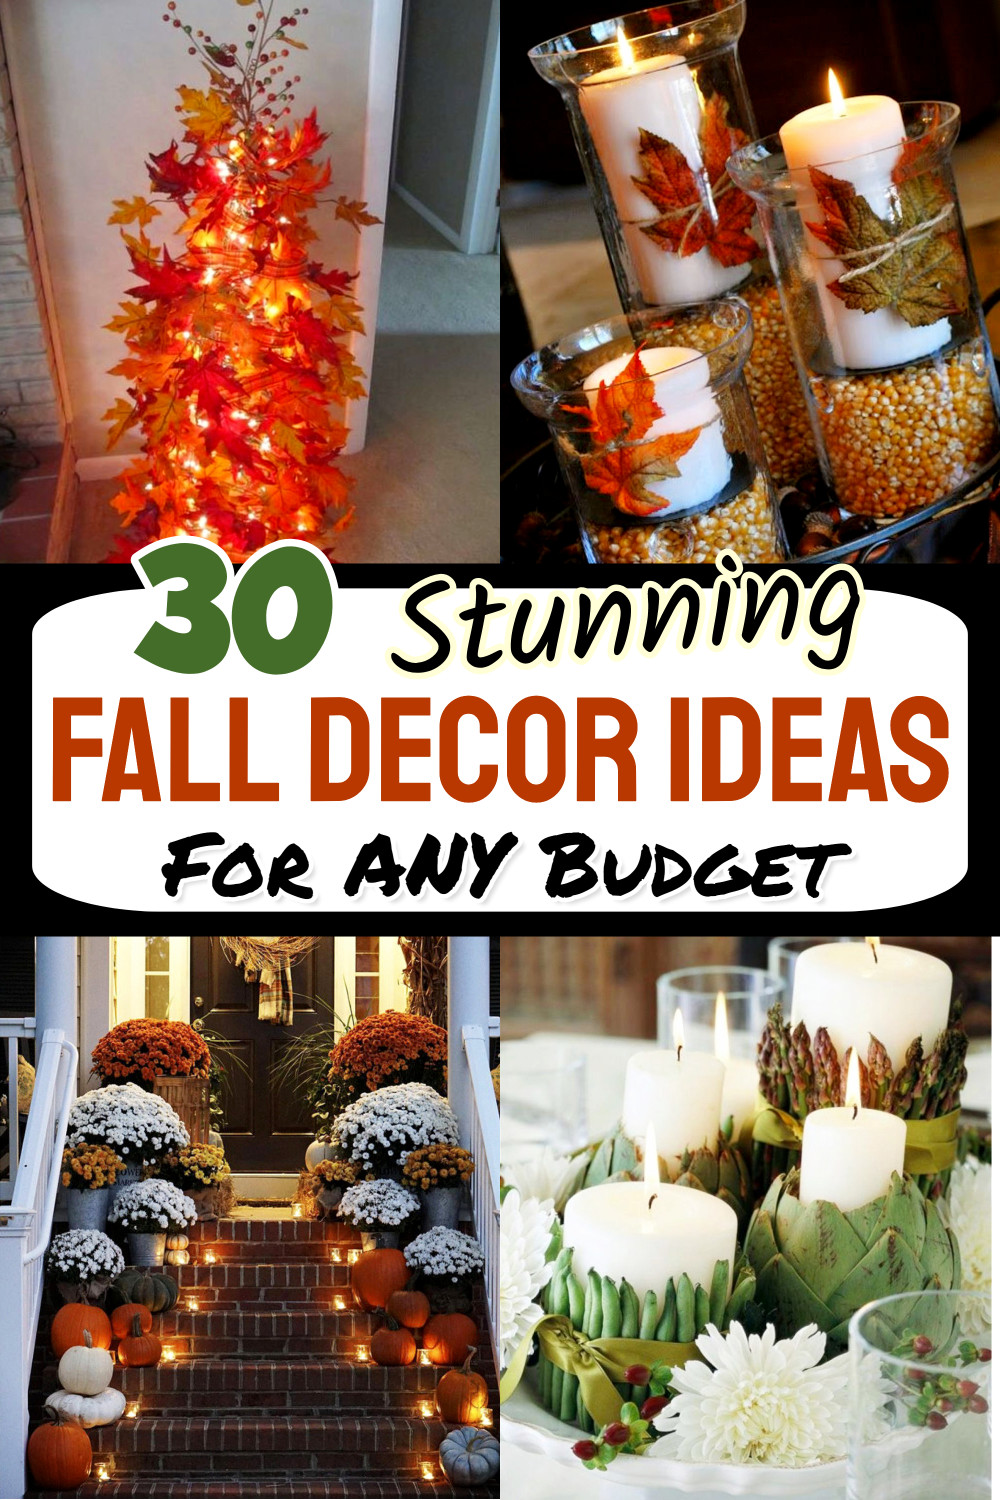 Stunning Fall decor ideas and DIY decorating crafts to make to decorate your home for Fall on a budget